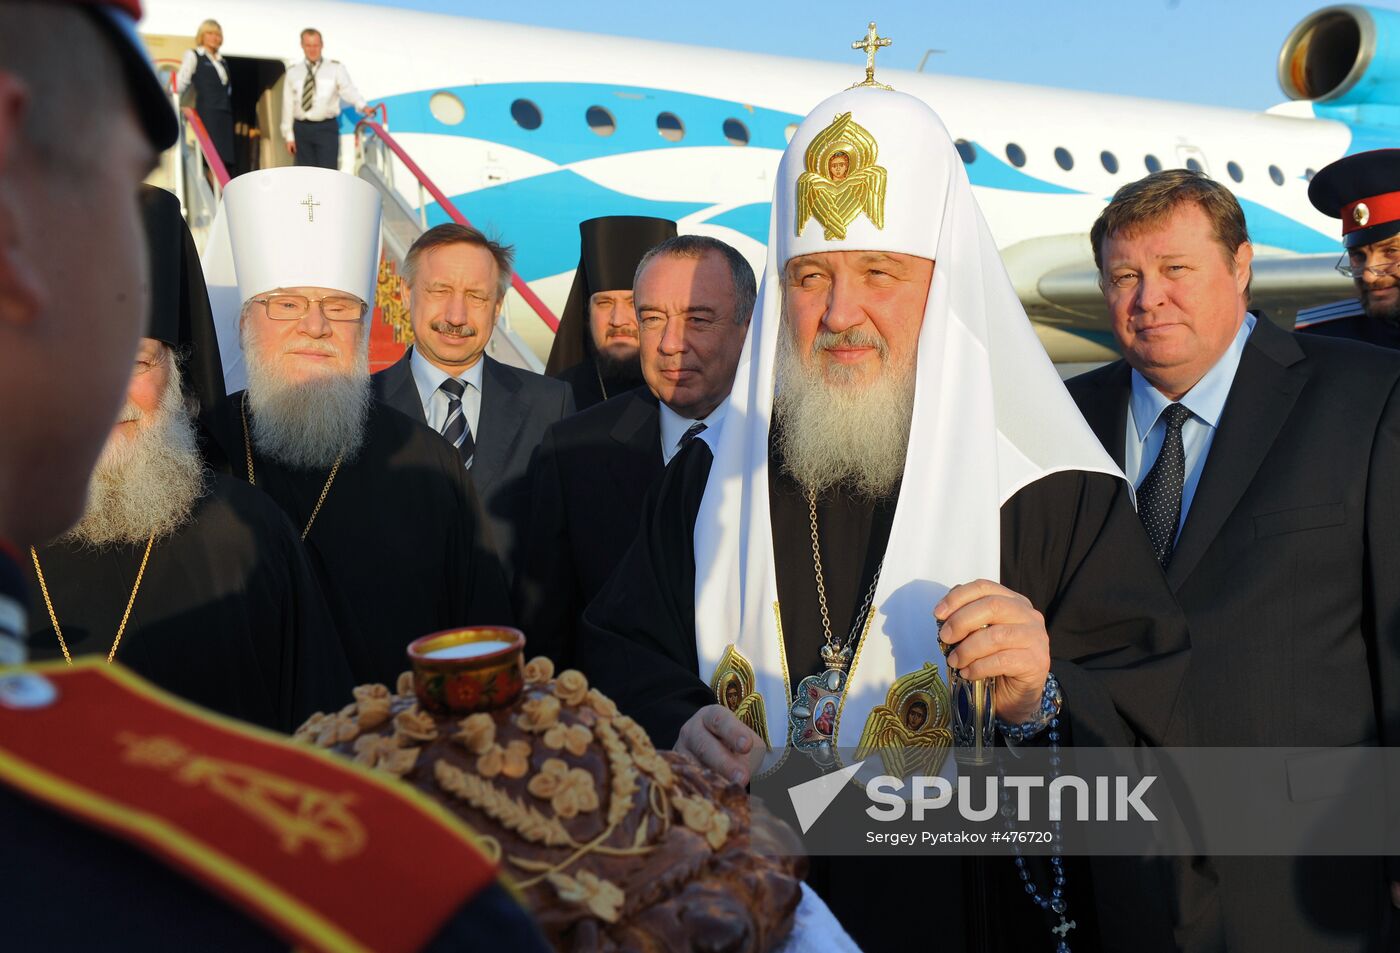 Russian Patriarch arrives in Rostov-on-Don